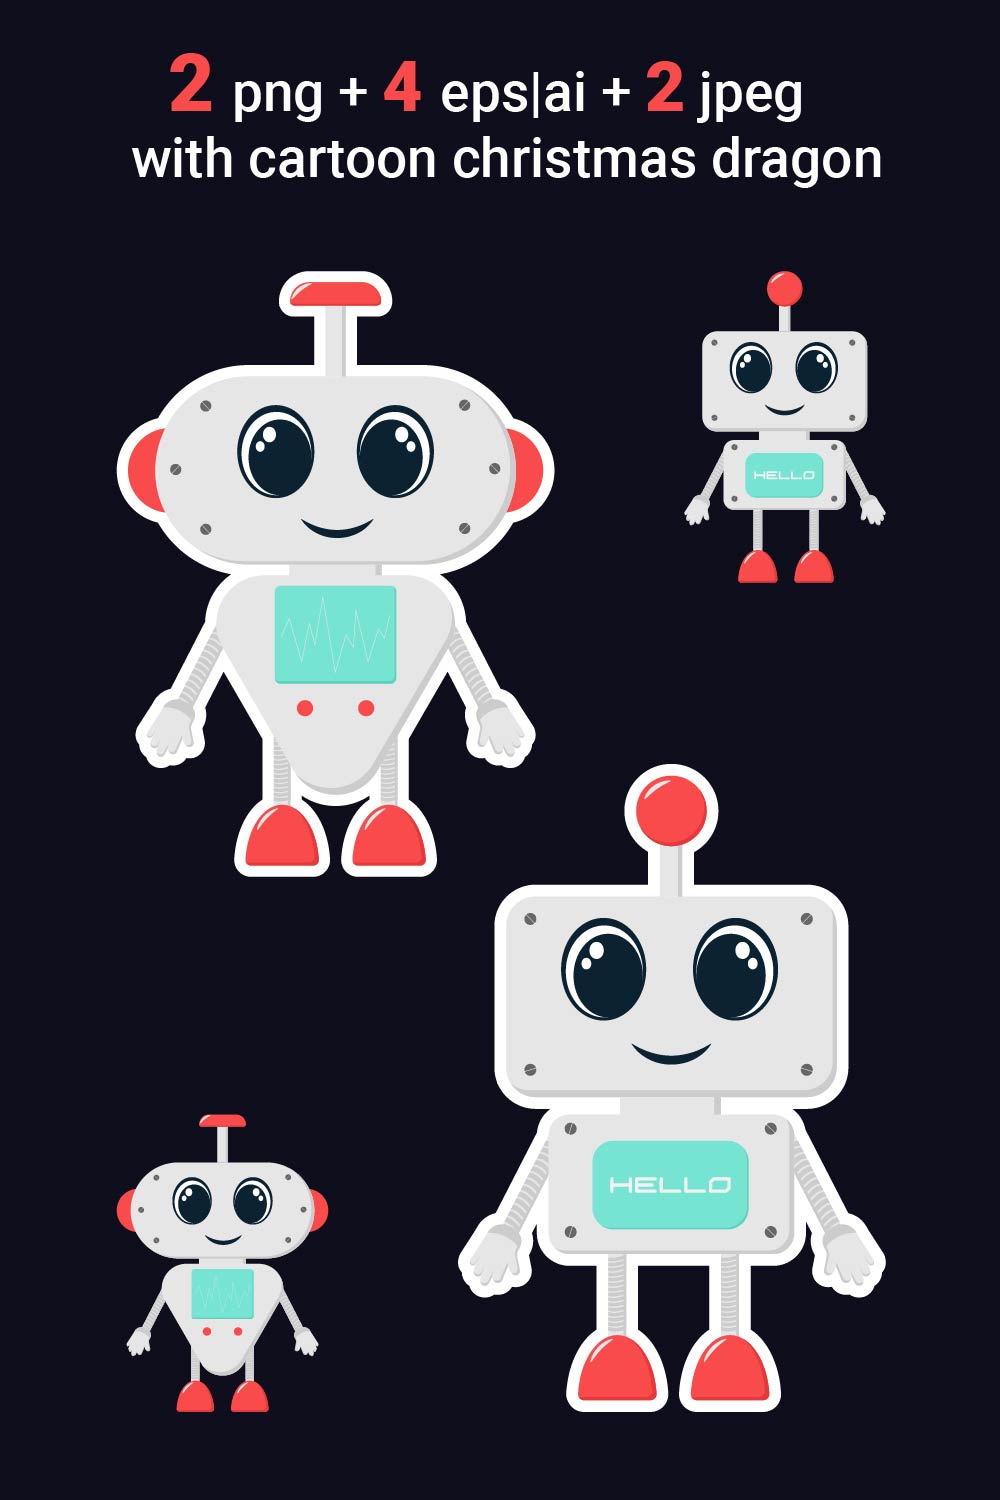 Illustrations and stickers with cute robots with big eyes